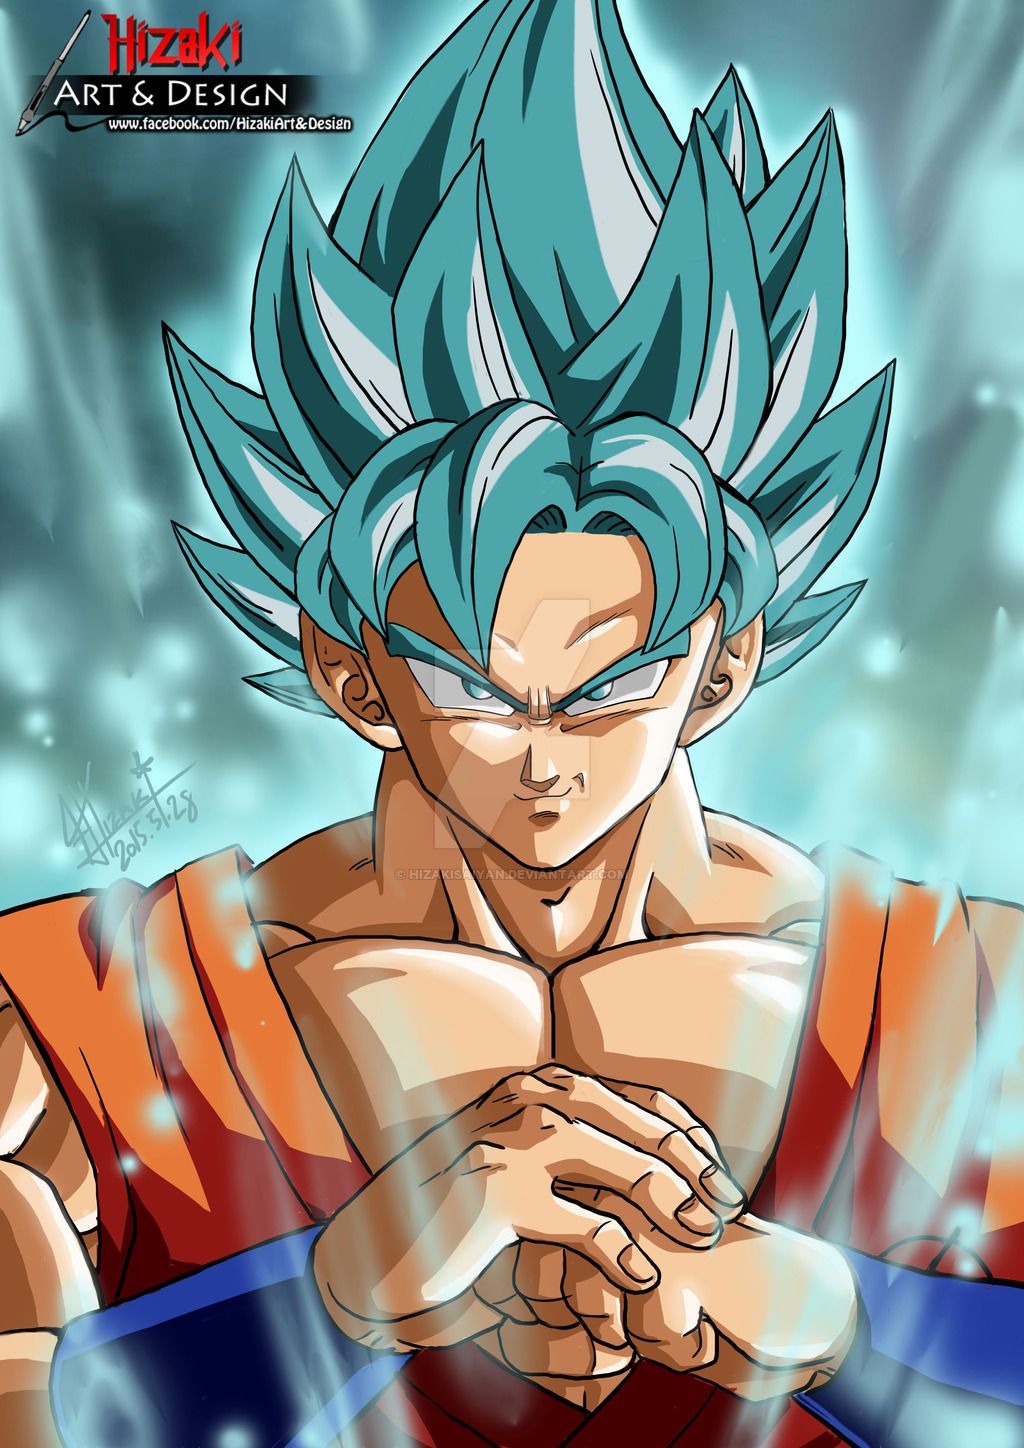 Free download Goku ssgss by HizakiSaiyan [1024x1448] for your Desktop, Mobile & Tablet. Explore SSGSS Goku Wallpaper. Super Saiyan Goku Wallpaper, Goku Desktop Wallpaper, SSGSS Vegeta Wallpaper